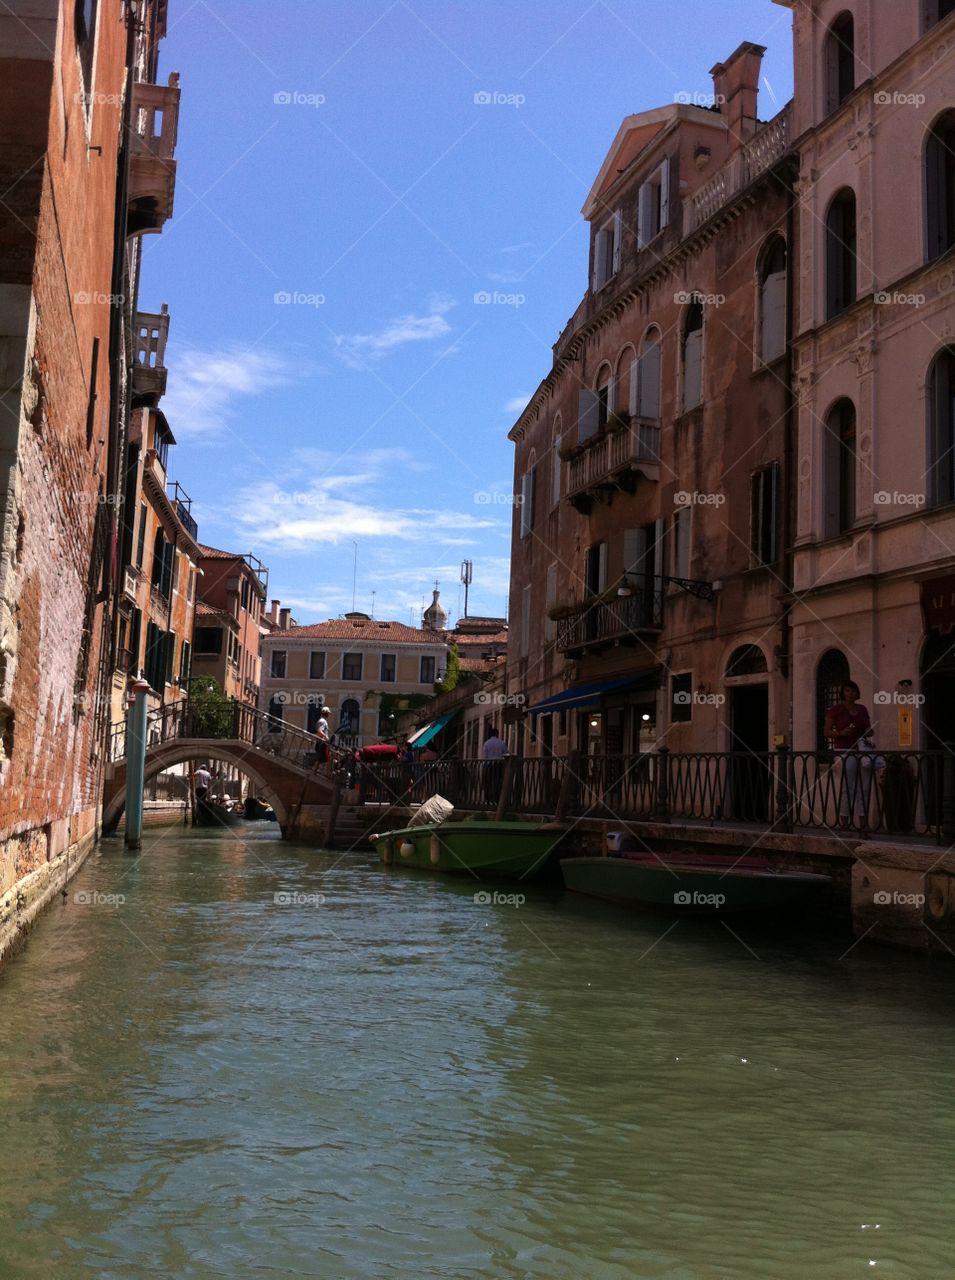 Canals of Venice.